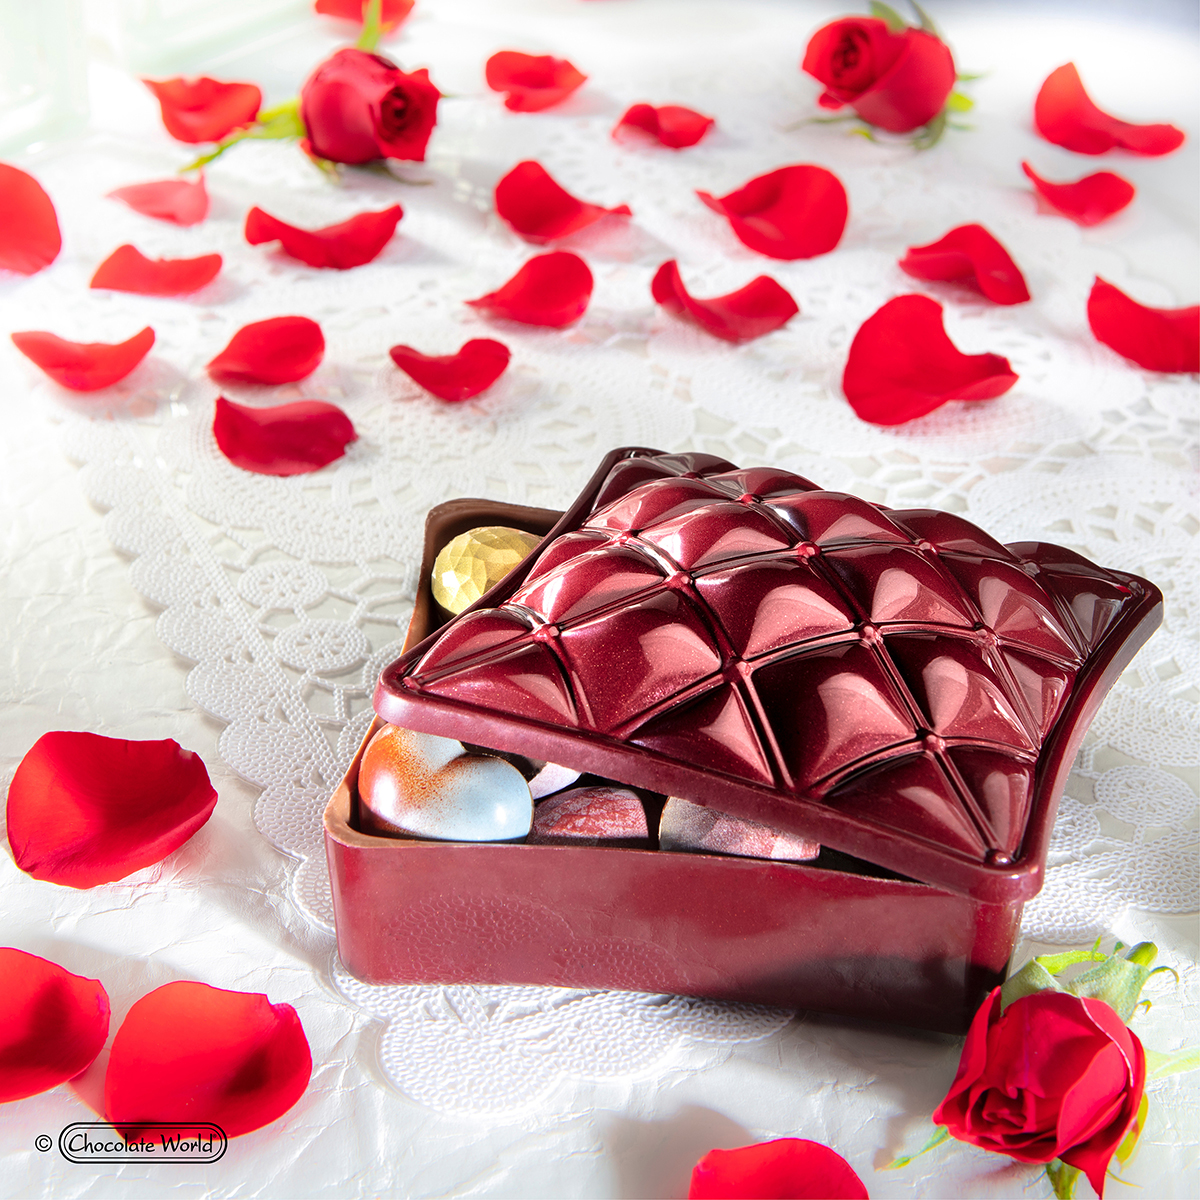 Chocolate Mold Inspiration for Mother's Day